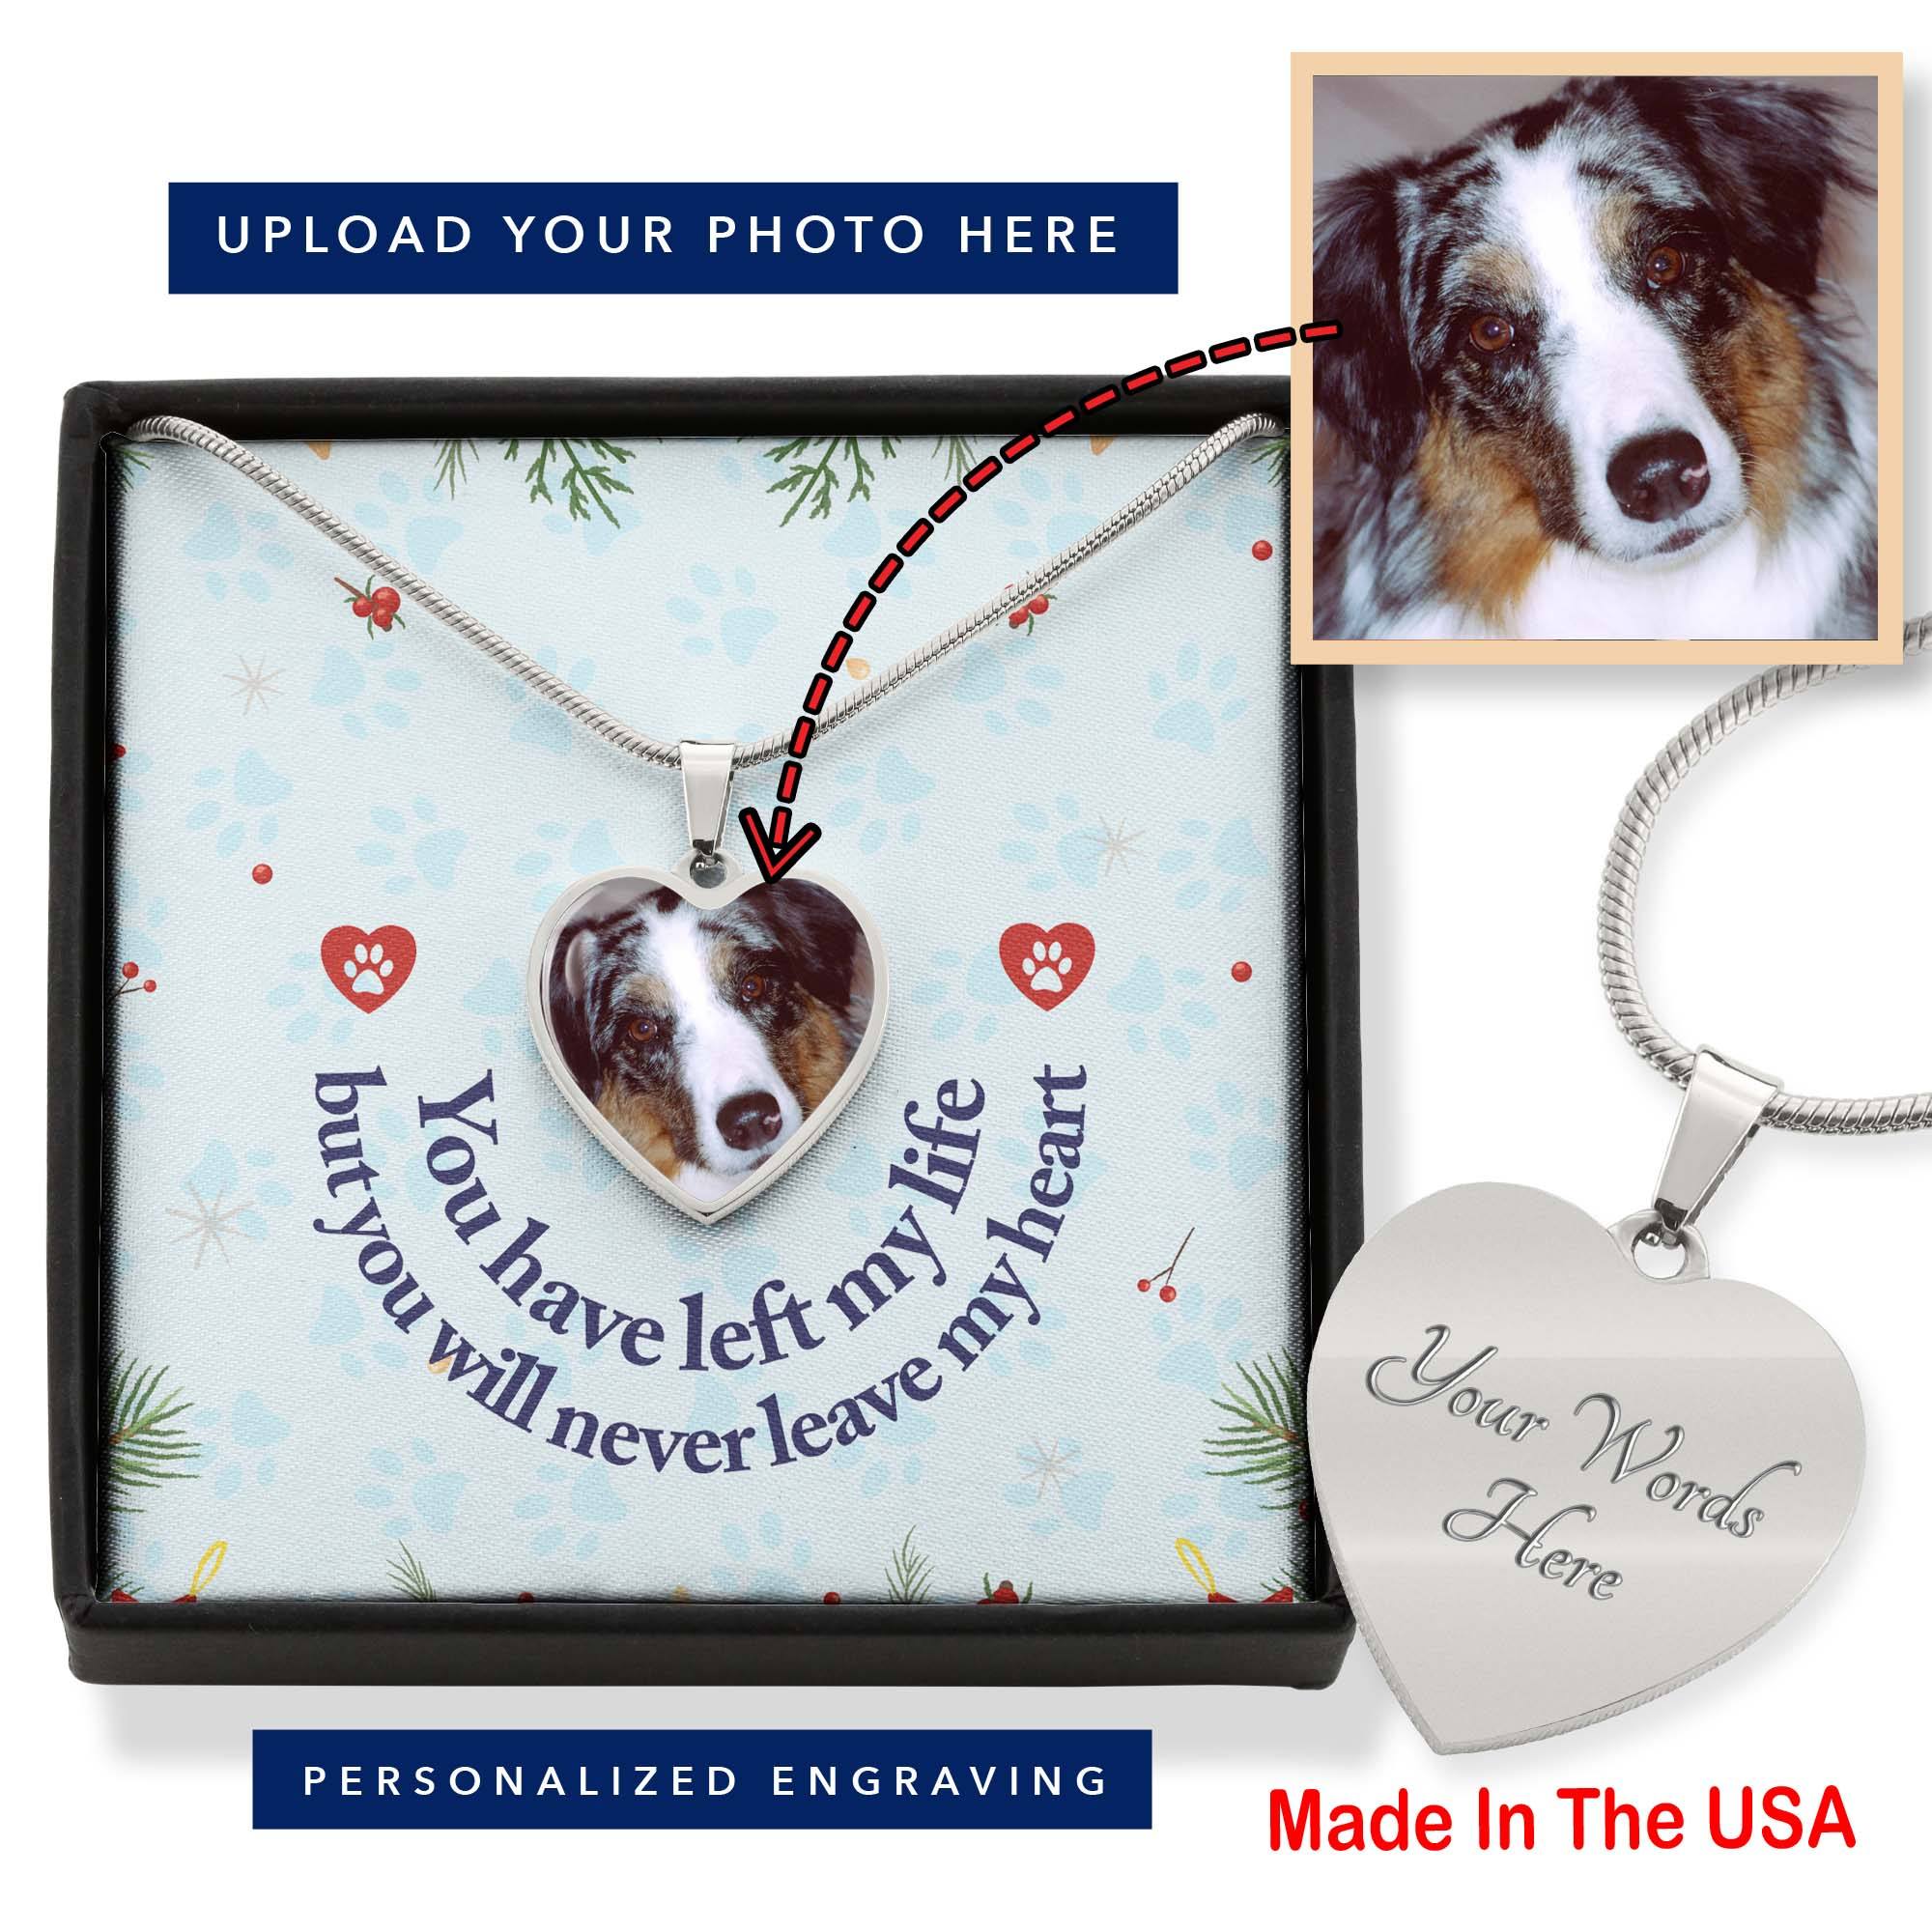 Pet Remembrance Necklace - Upload Photo and Engrave